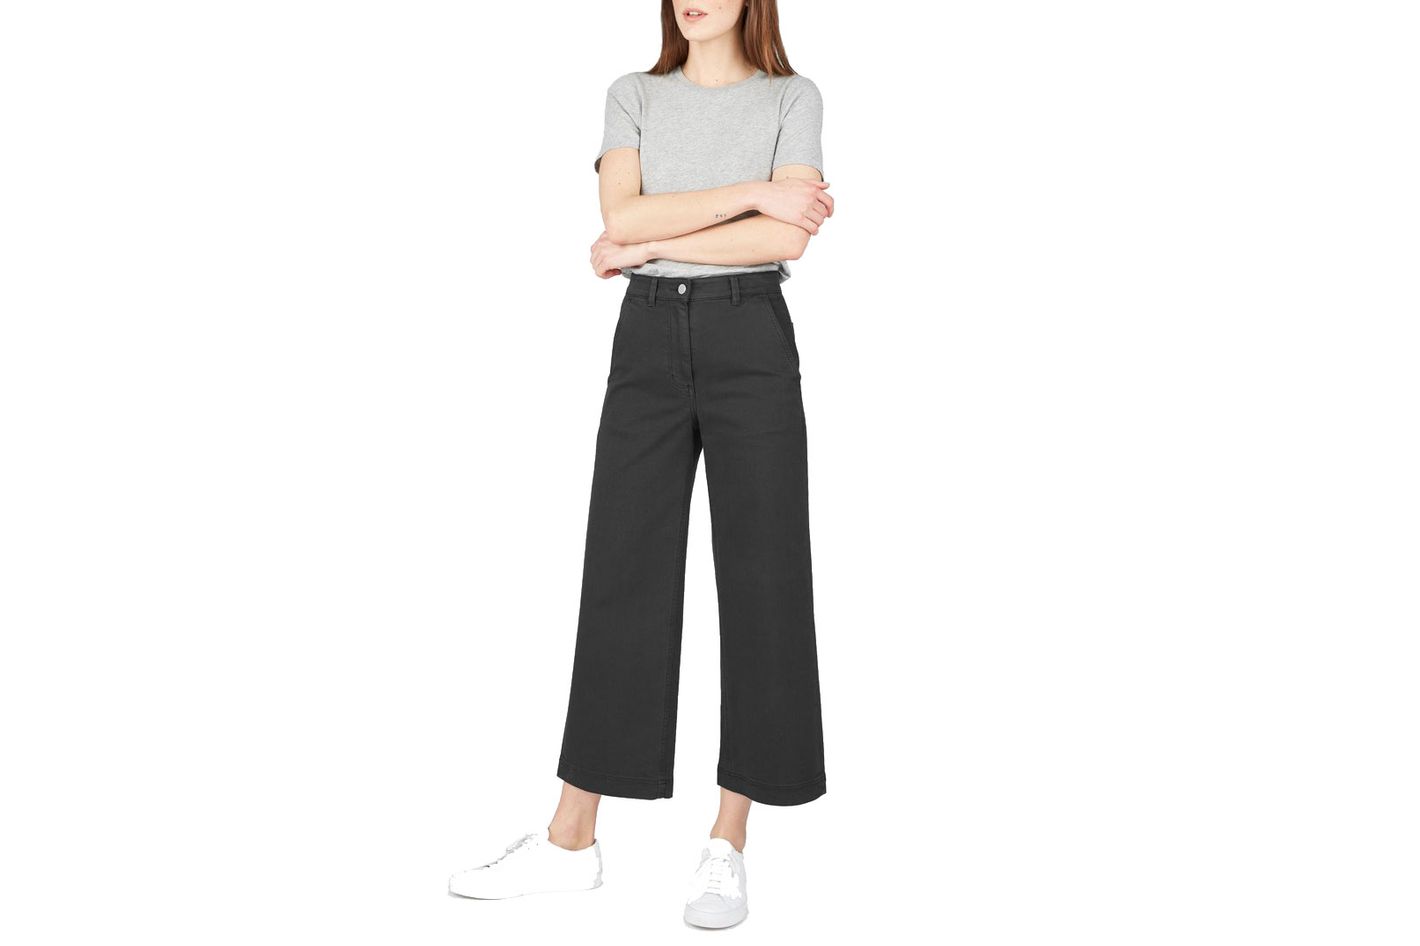 11 Cropped & Wide-Leg Pants That'll Make You Look Ugly-Cool